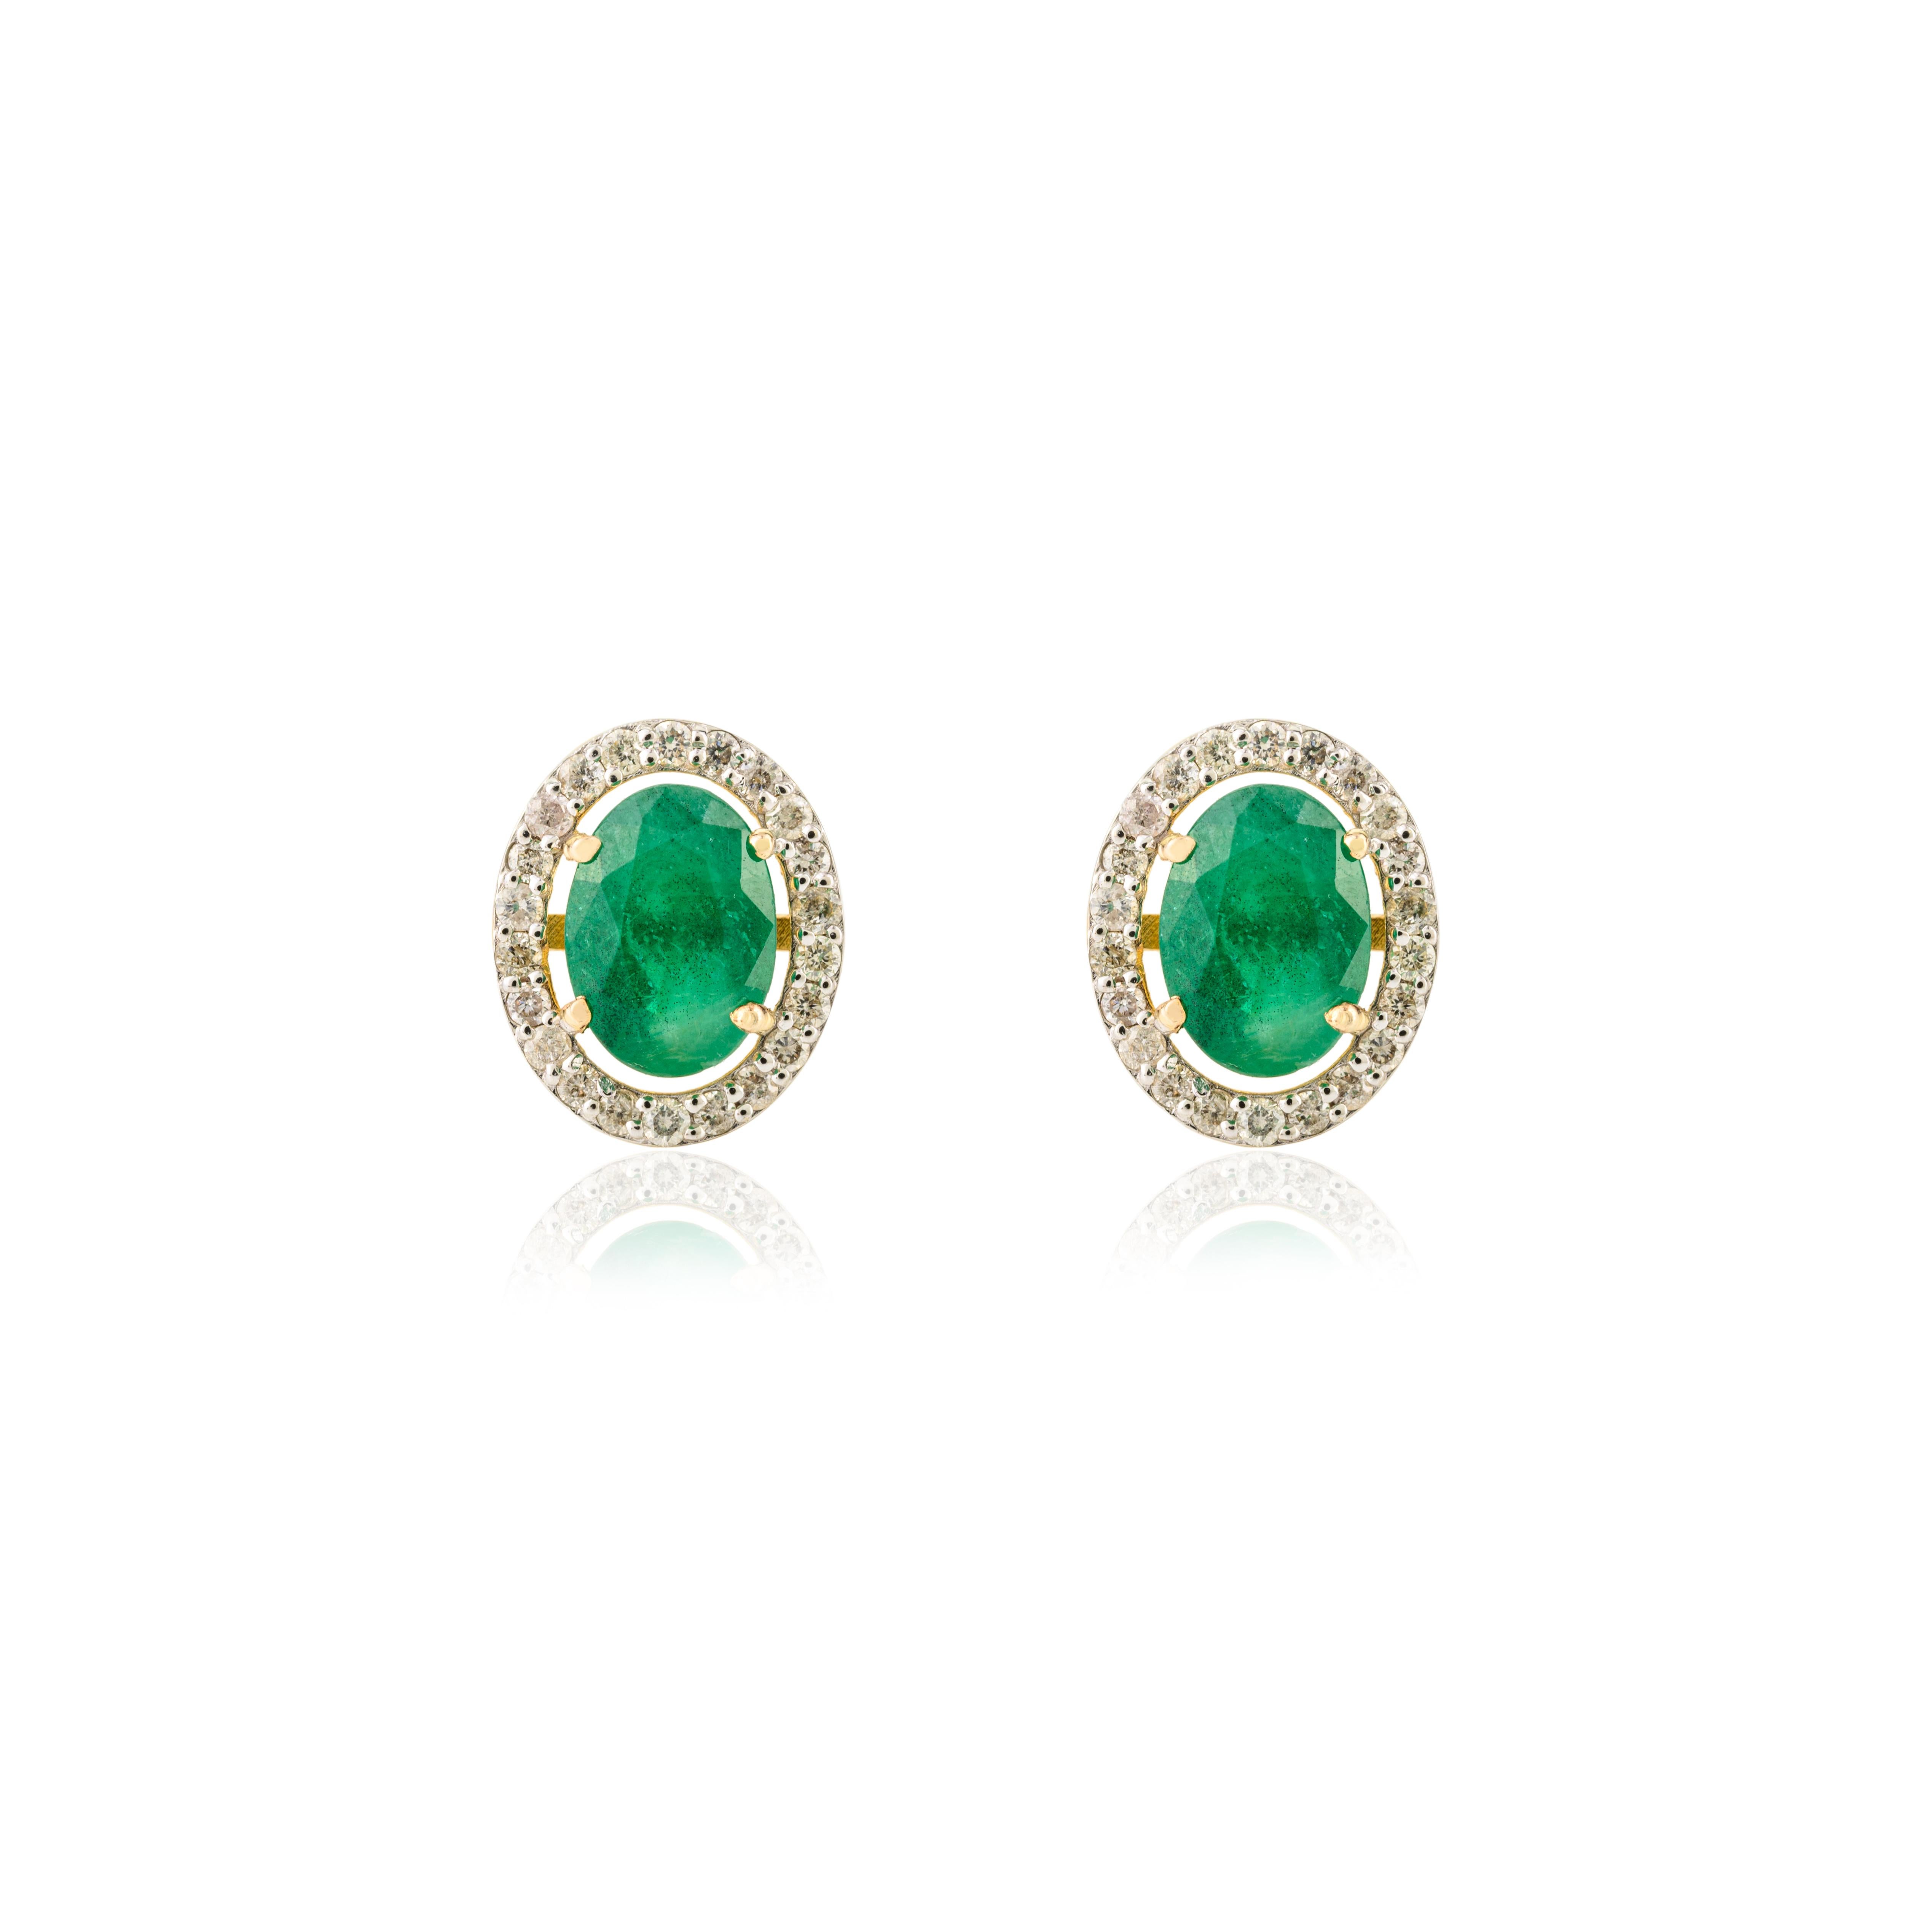 Modern 14 Karat Yellow Gold Oval Emerald and Diamond Halo Stud Earrings Gift for Mom For Sale